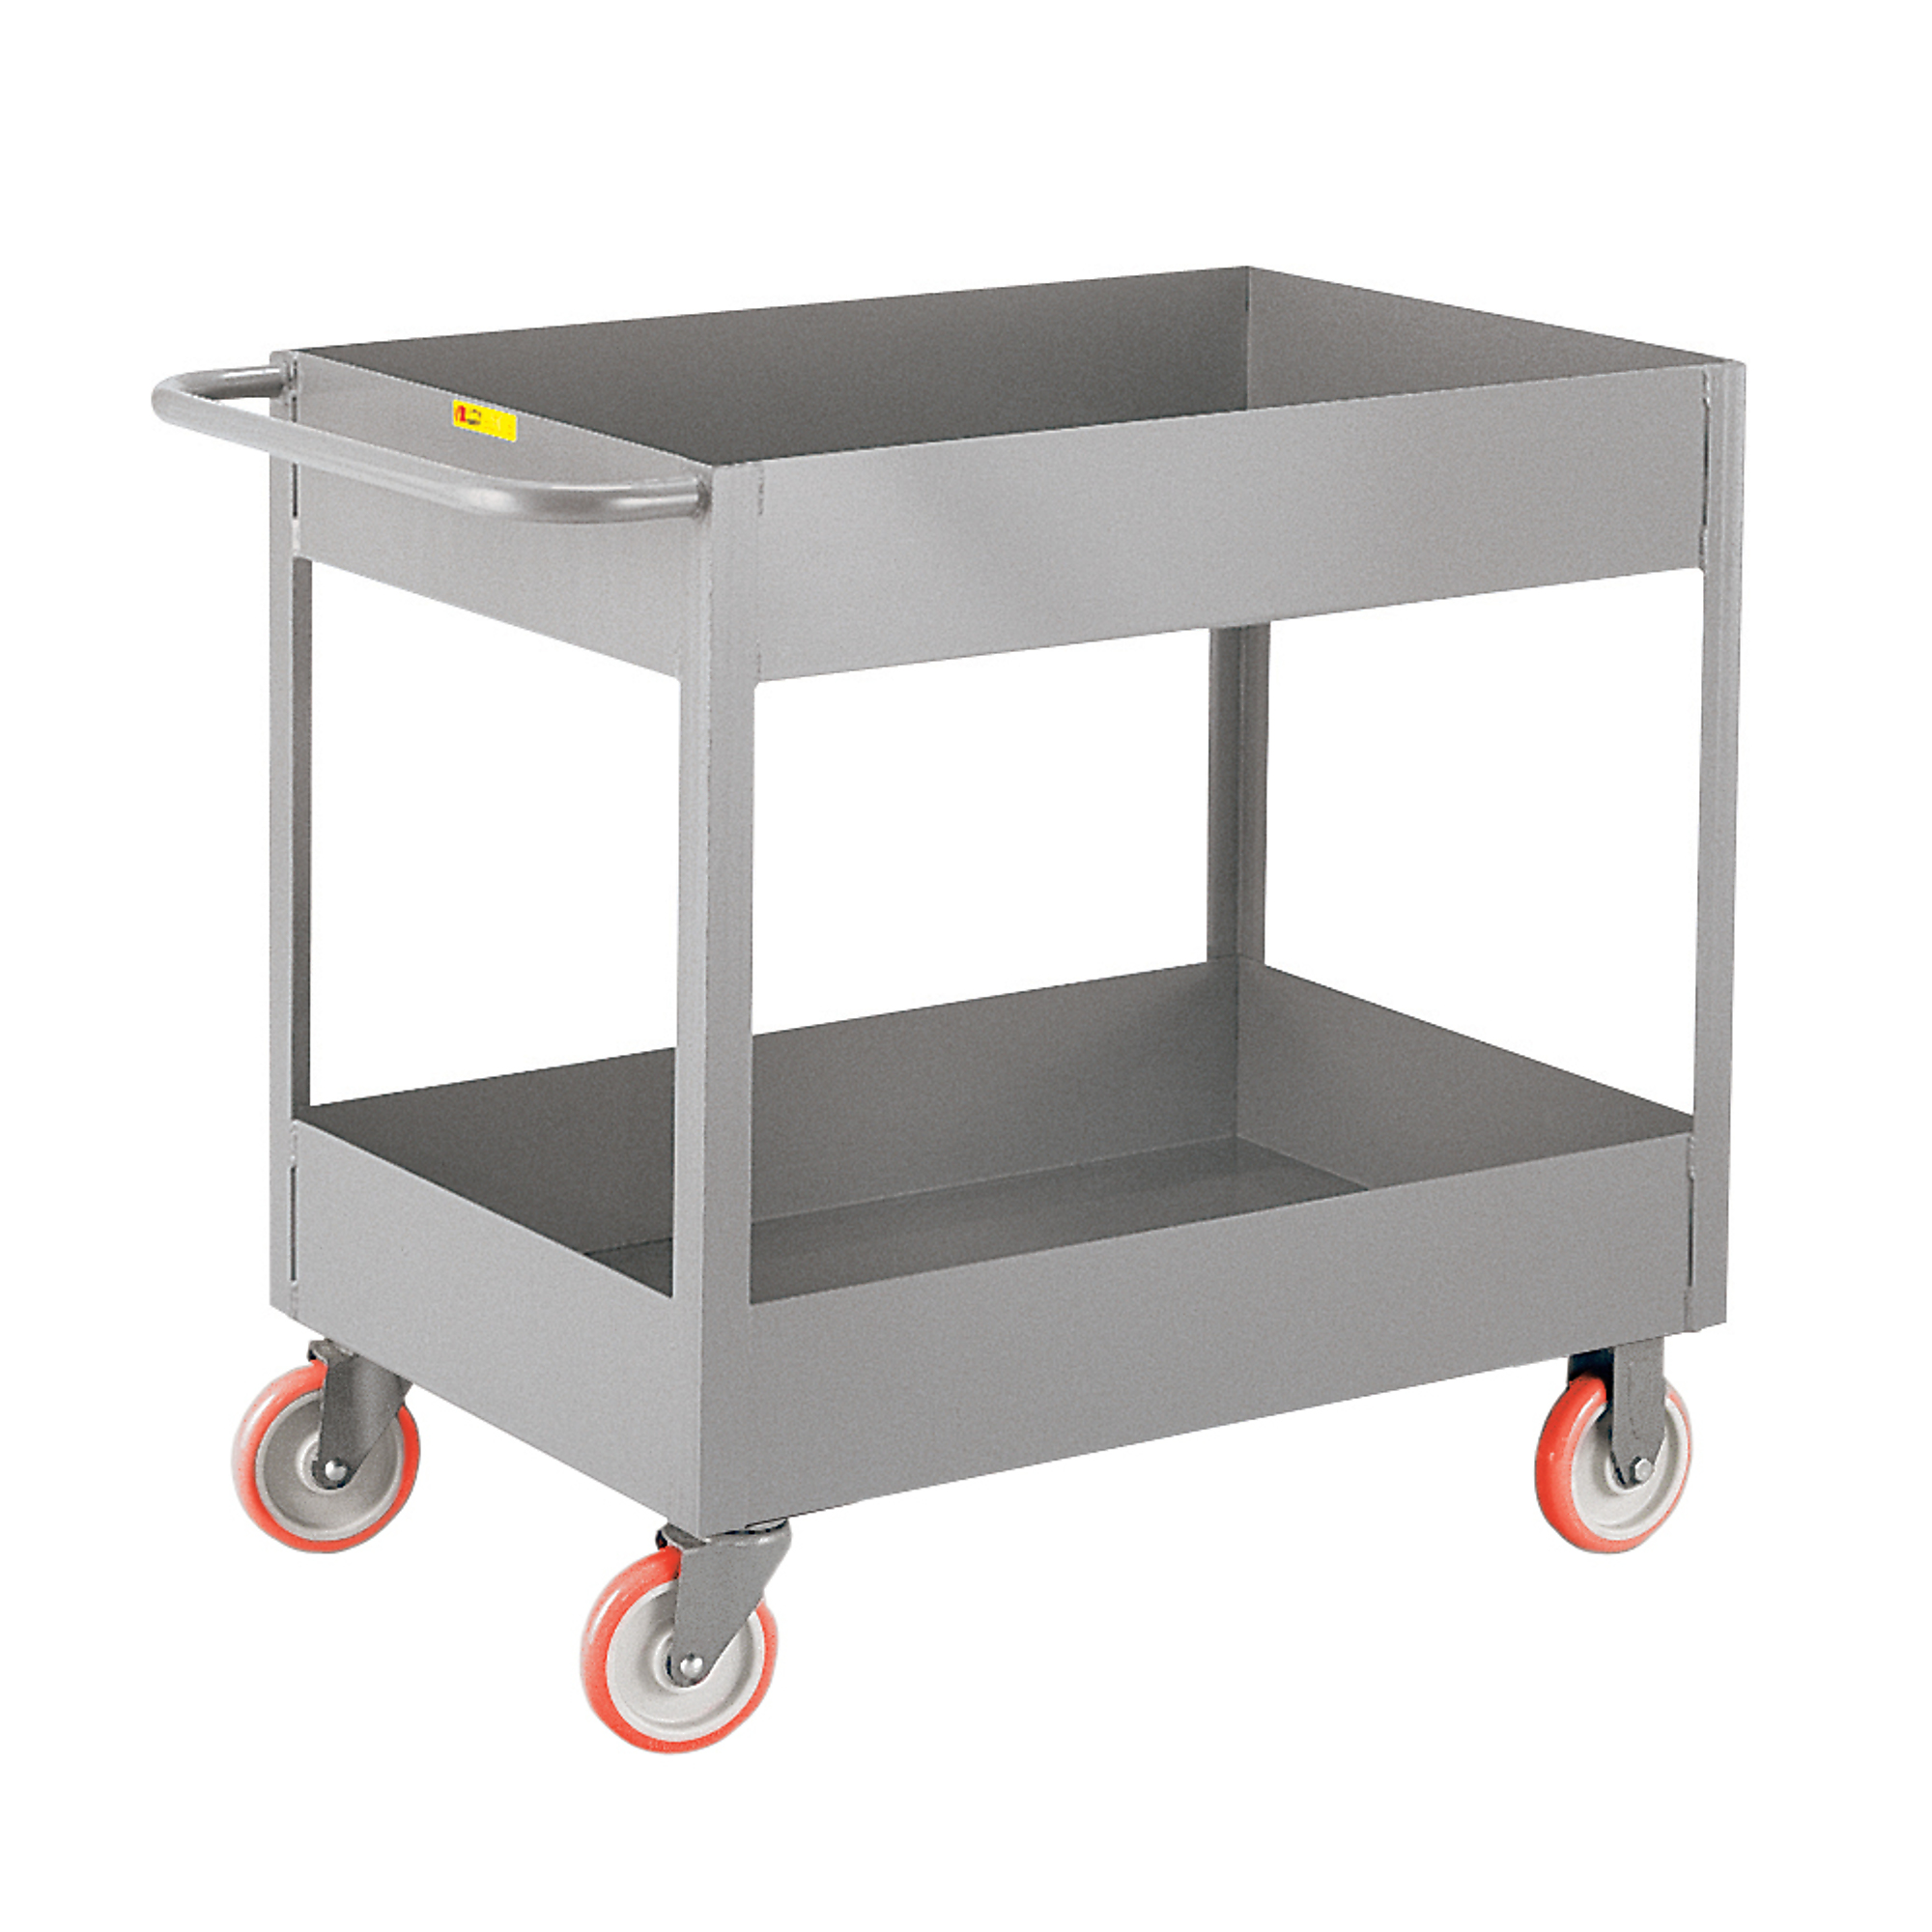 Little Giant, 6Inch Deep Shelf Truck, 24x48, 1200 lbs, Total Capacity 1200 lb, Shelves (qty.) 2, Material Carbon Steel, Model DS2448X6-5PY